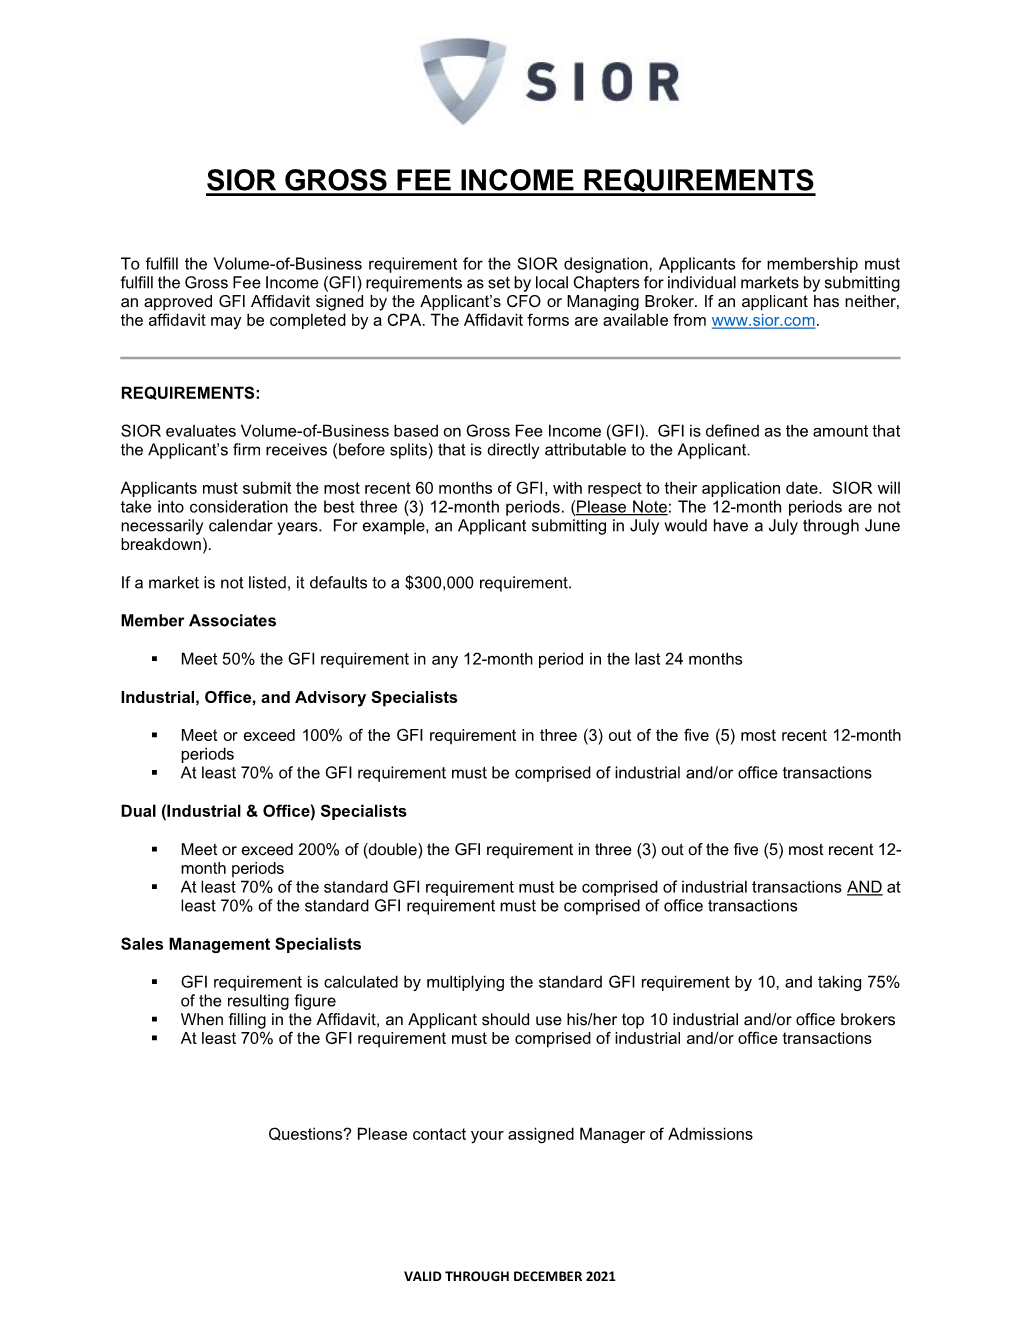 Sior Gross Fee Income Requirements